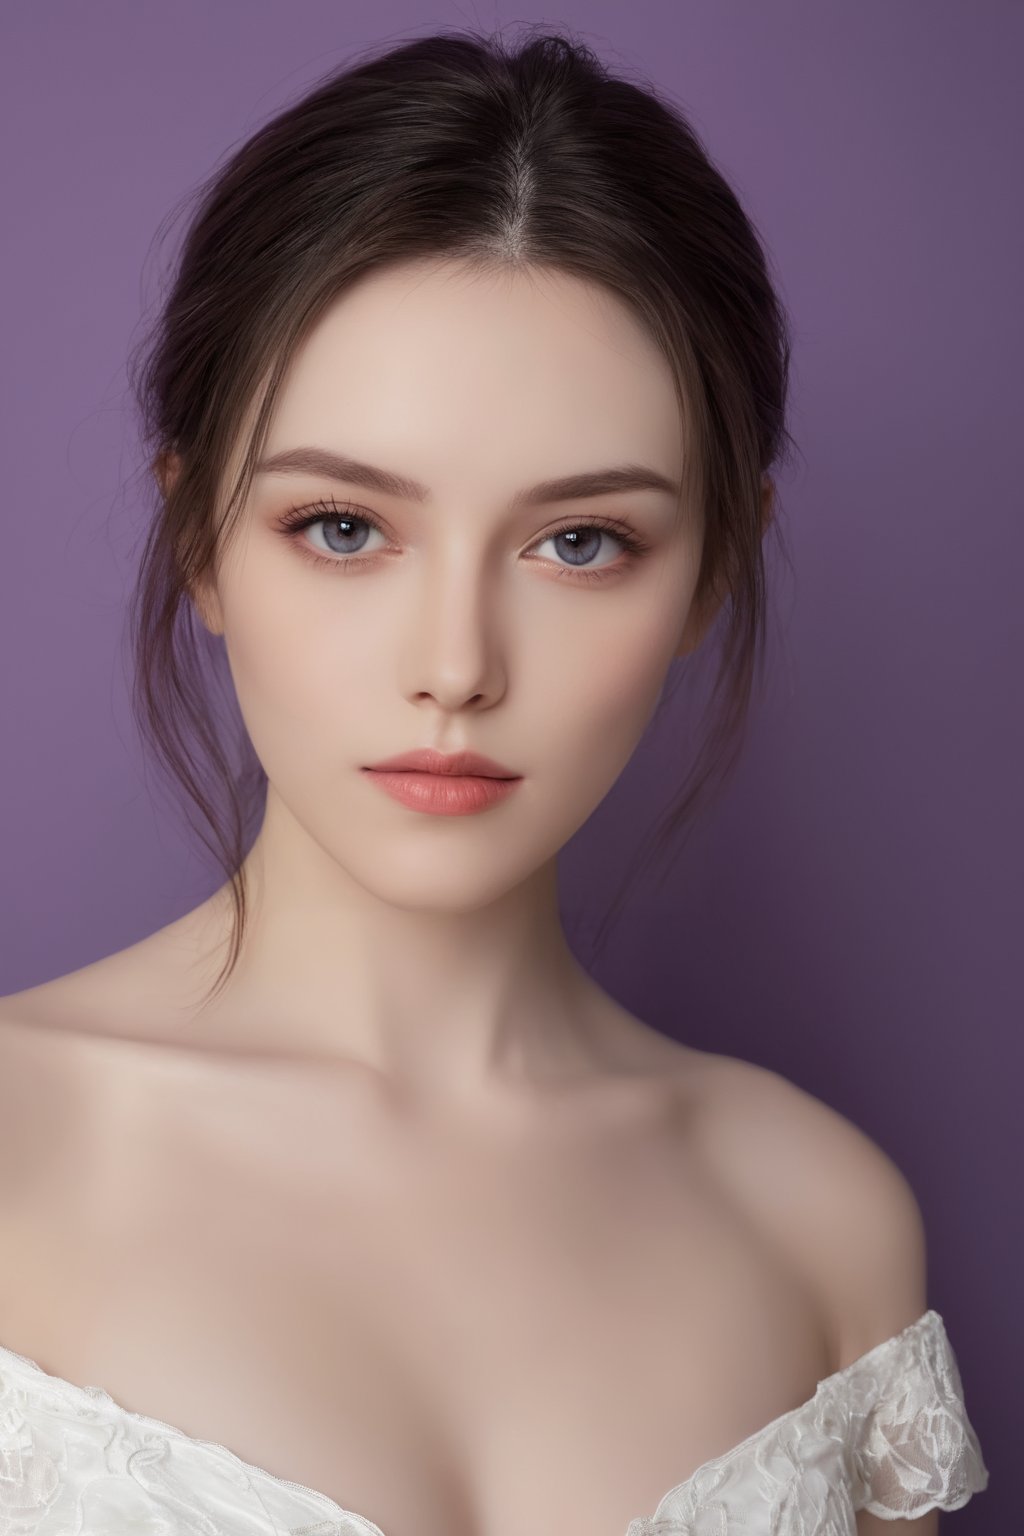 photorealistic,portrait of hubggirl, 
(ultra realistic,best quality),photorealistic,Extremely Realistic, in depth, cinematic light,

1girl, exquisite makeup, eye_contact, ambiguity, sexy pose, purple background, white dress,

perfect lighting, vibrant colors, intricate details, high detailed skin, pale skin, intricate background, realism,realistic,raw,analog,portrait,photorealistic, taken by Canon EOS,SIGMA Art Lens 35mm F1.4,ISO 200 Shutter Speed 2000,Vivid picture,